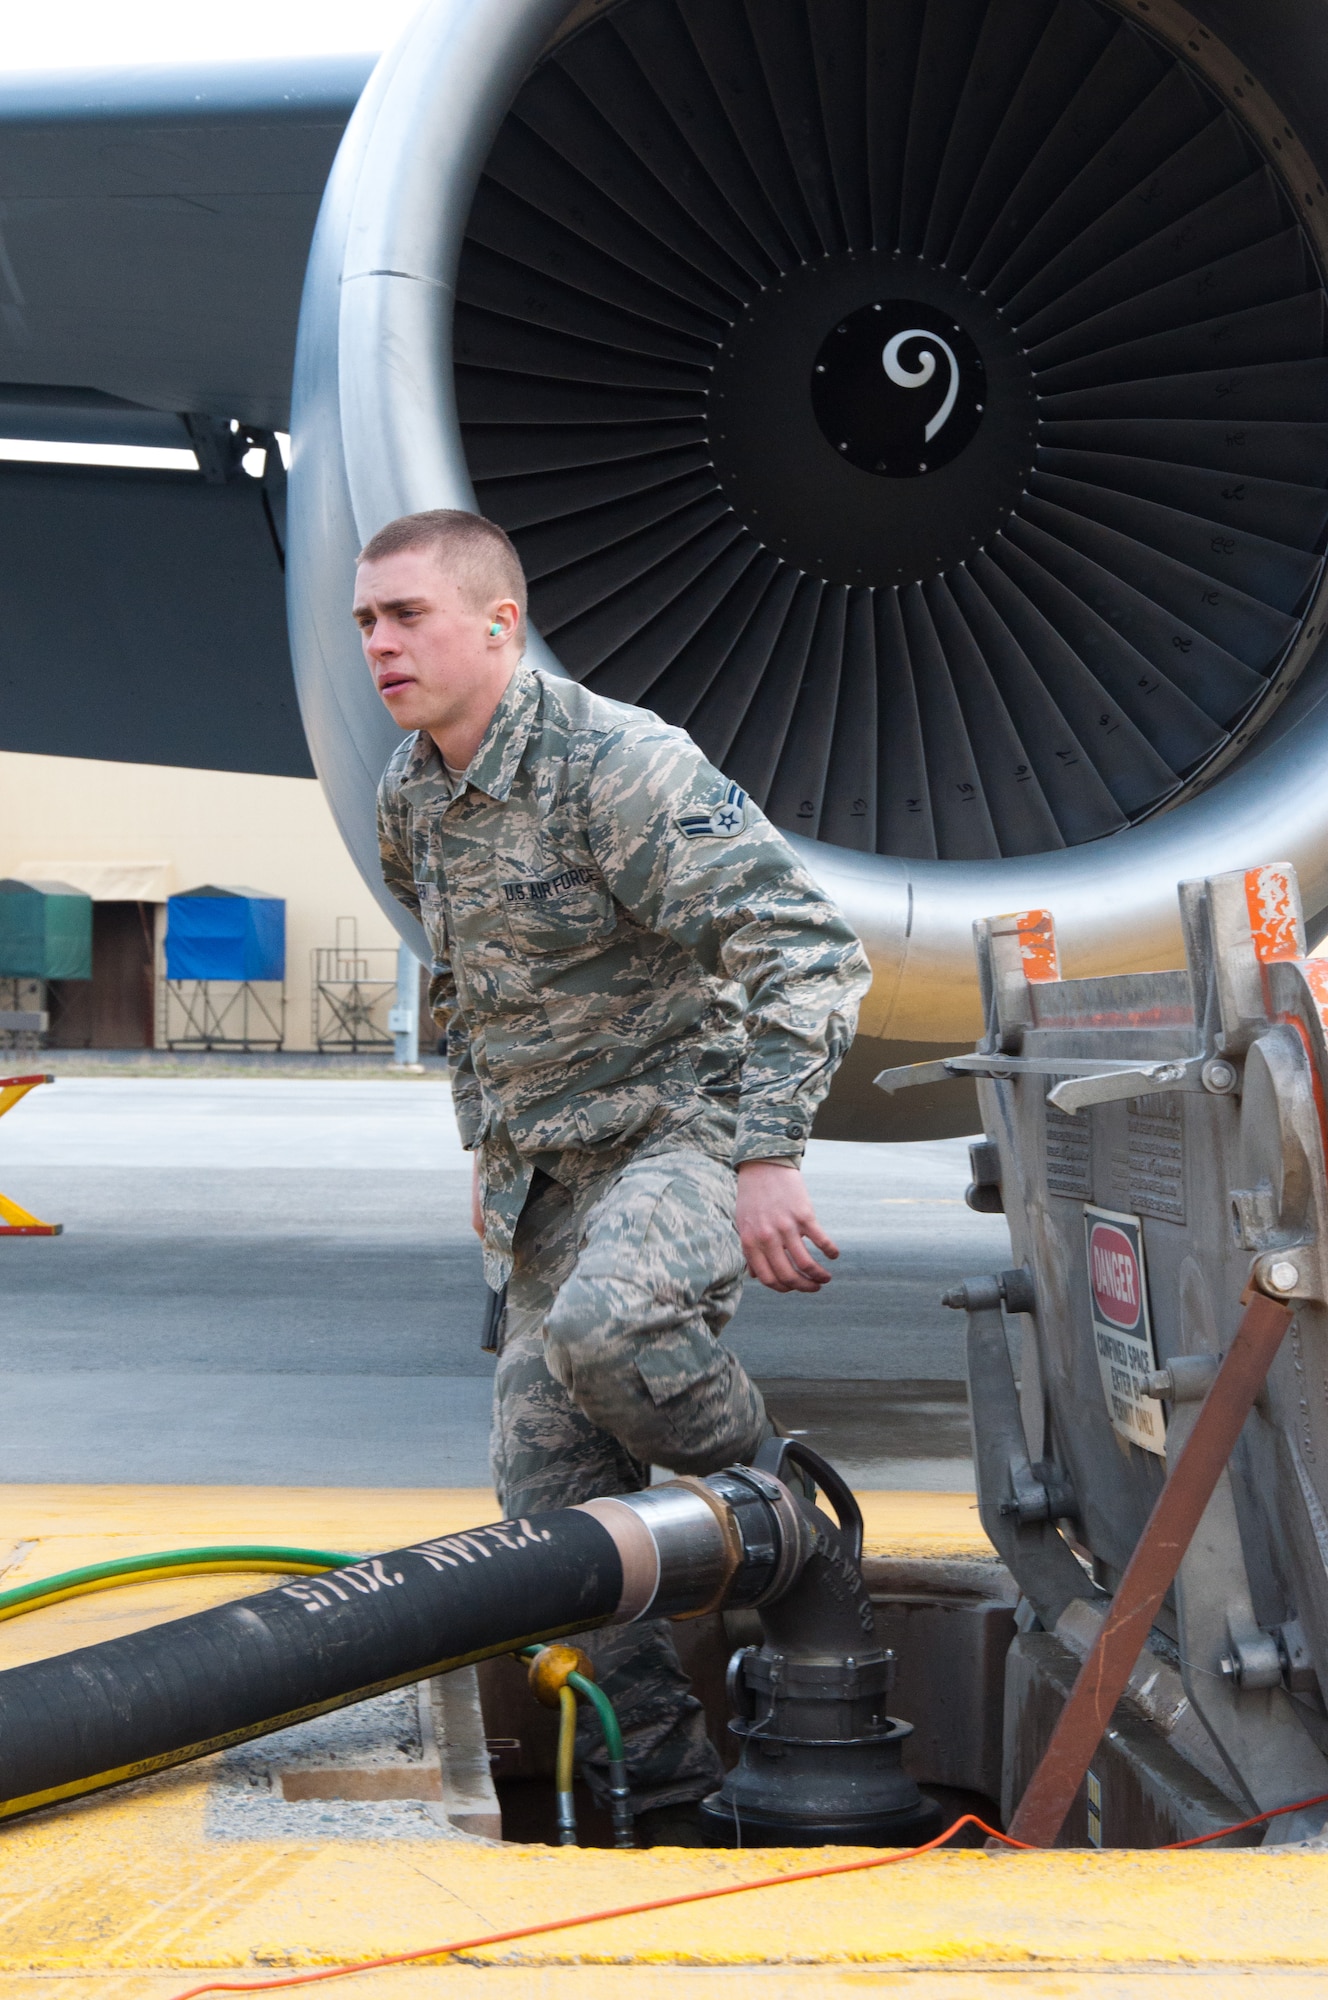 Airman 1st Class Daniel Langer, a 92nd Logistics Readiness Squadron fuels distribution operator, exits a fuel hydrant pit before pumping fuel from an R-12 fuel truck into a KC-135 Stratotanker aerial refueling aircraft assigned to the 92nd Air Refueling Wing March 2, 2015, at Fairchild Air Force Base, Wash. Langer and his fellow fuels distribution operators work around the clock in all weather conditions to ensure Fairchild’s KC-135s are ready to provide tanker support to a variety of missions that includes search & rescue, homeland defense, training and deployed operations. (U.S. Air Force photo/Capt. David Liapis)